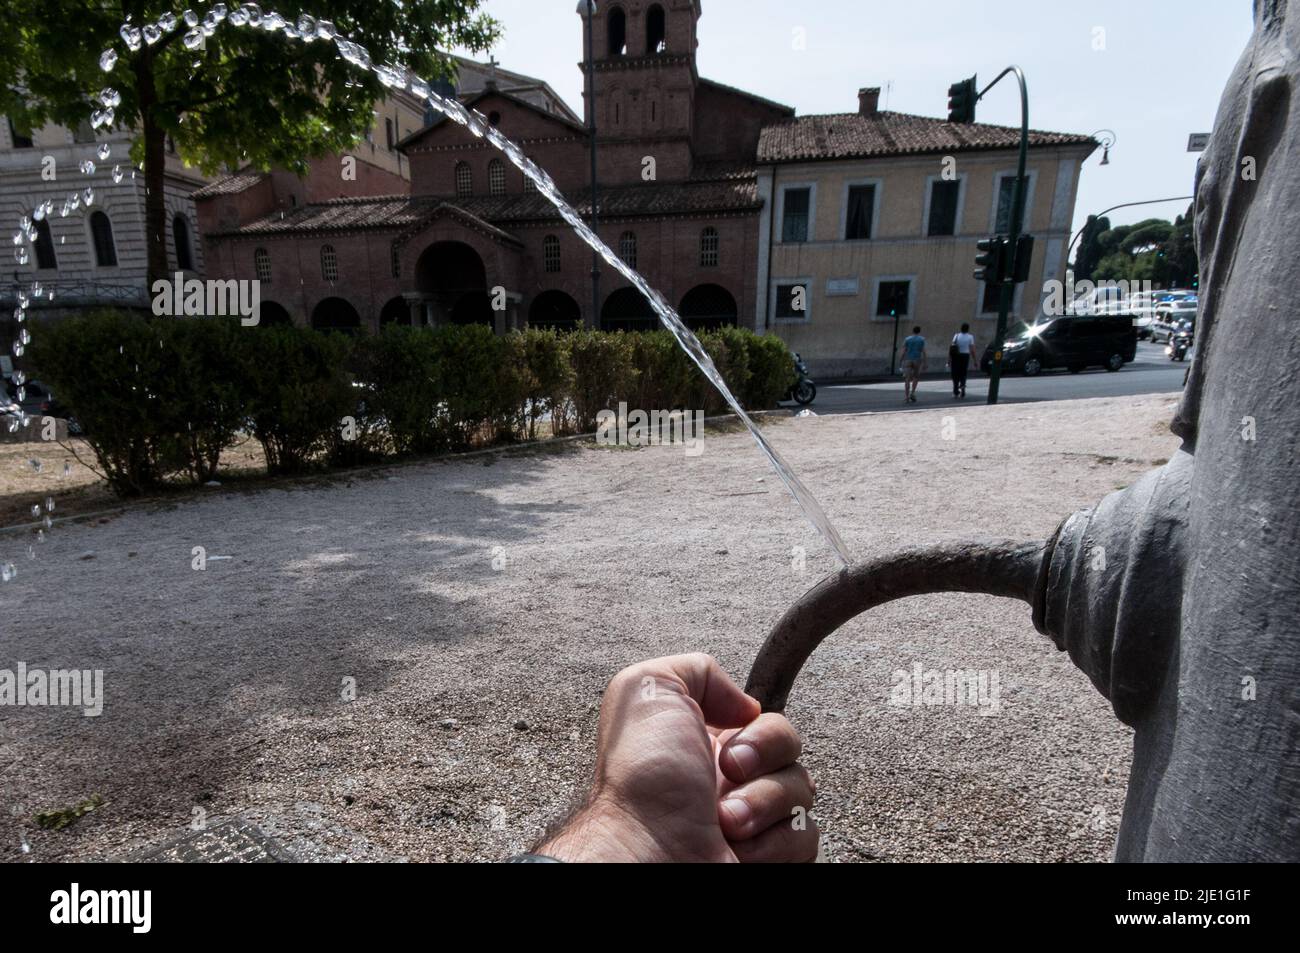 June 24, 2022, Rome, Italy: A fountain in Rome. Lazio on 20 June declared a state of calamity for drought that has hit the central Italian region and many others, especially in the north. Lazio Governor Nicola Zingaretti said the move was aimed at taking measures such as saving water in all activities starting with household consumption. A drought alert has spread from the Po valley, where waters are three quarters down amid the worst drought in 70 years, to central rivers like the Arno, the Aniene and the Tiber, which have half the water they normally do at this time of the year, officials sa Stock Photo